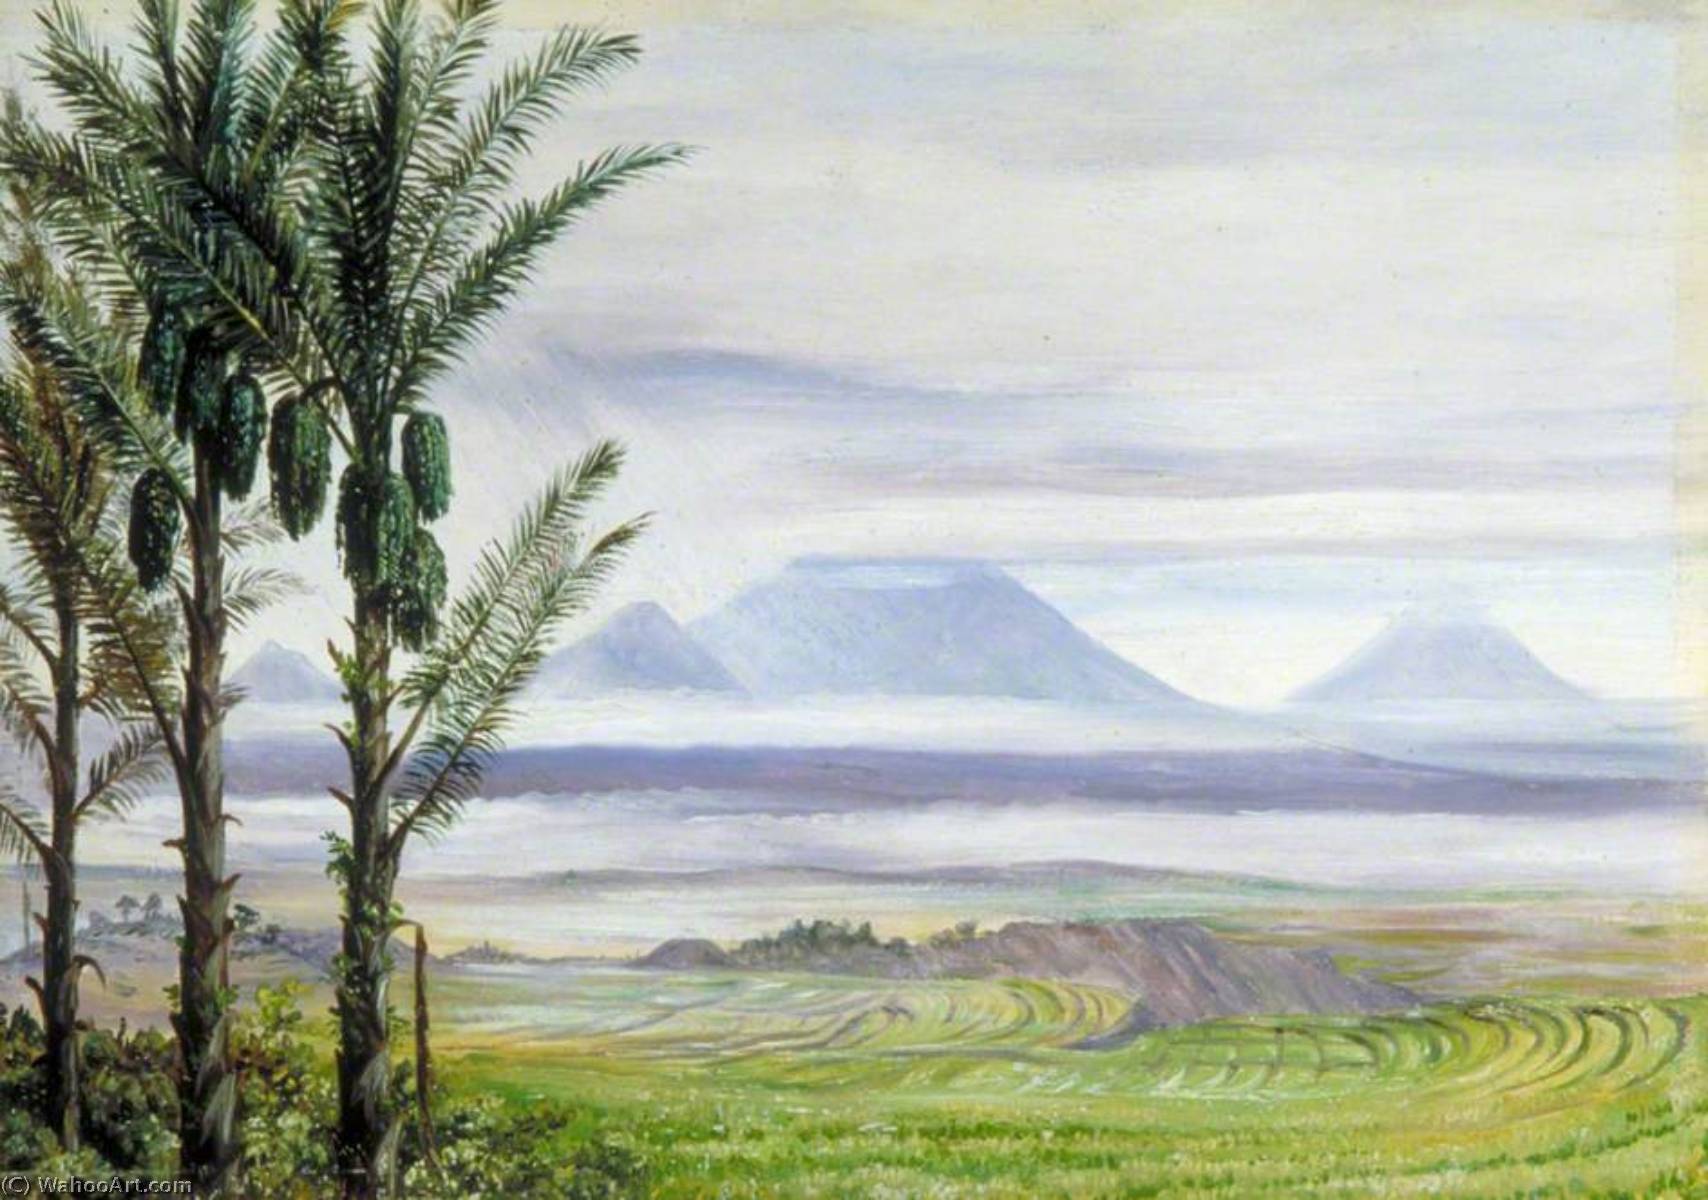 WikiOO.org - 백과 사전 - 회화, 삽화 Marianne North - Volcanoes from Temangong with Sugar Palms in the Foreground, Java